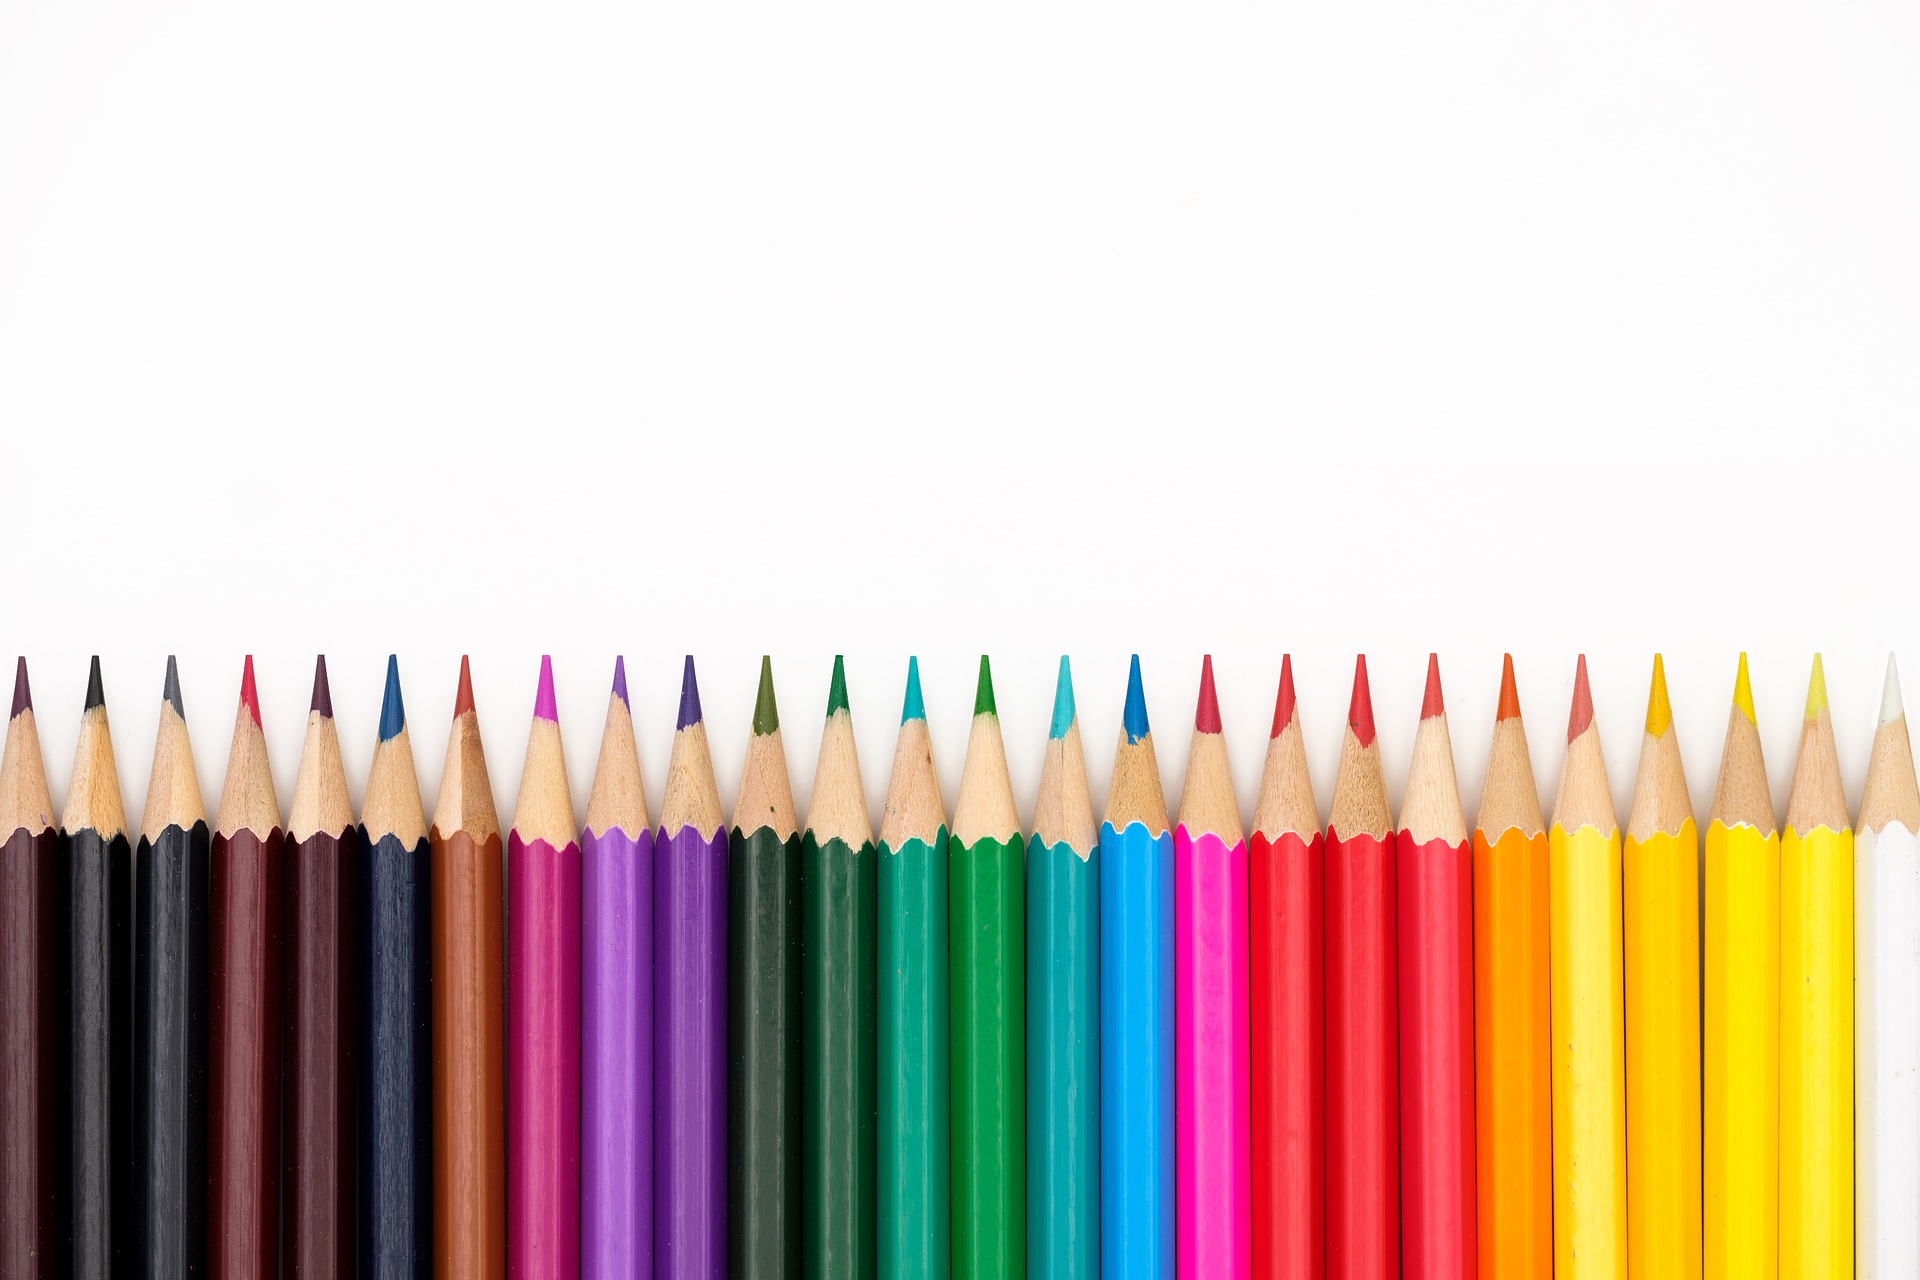 A row of colored pencils lined up in a line.